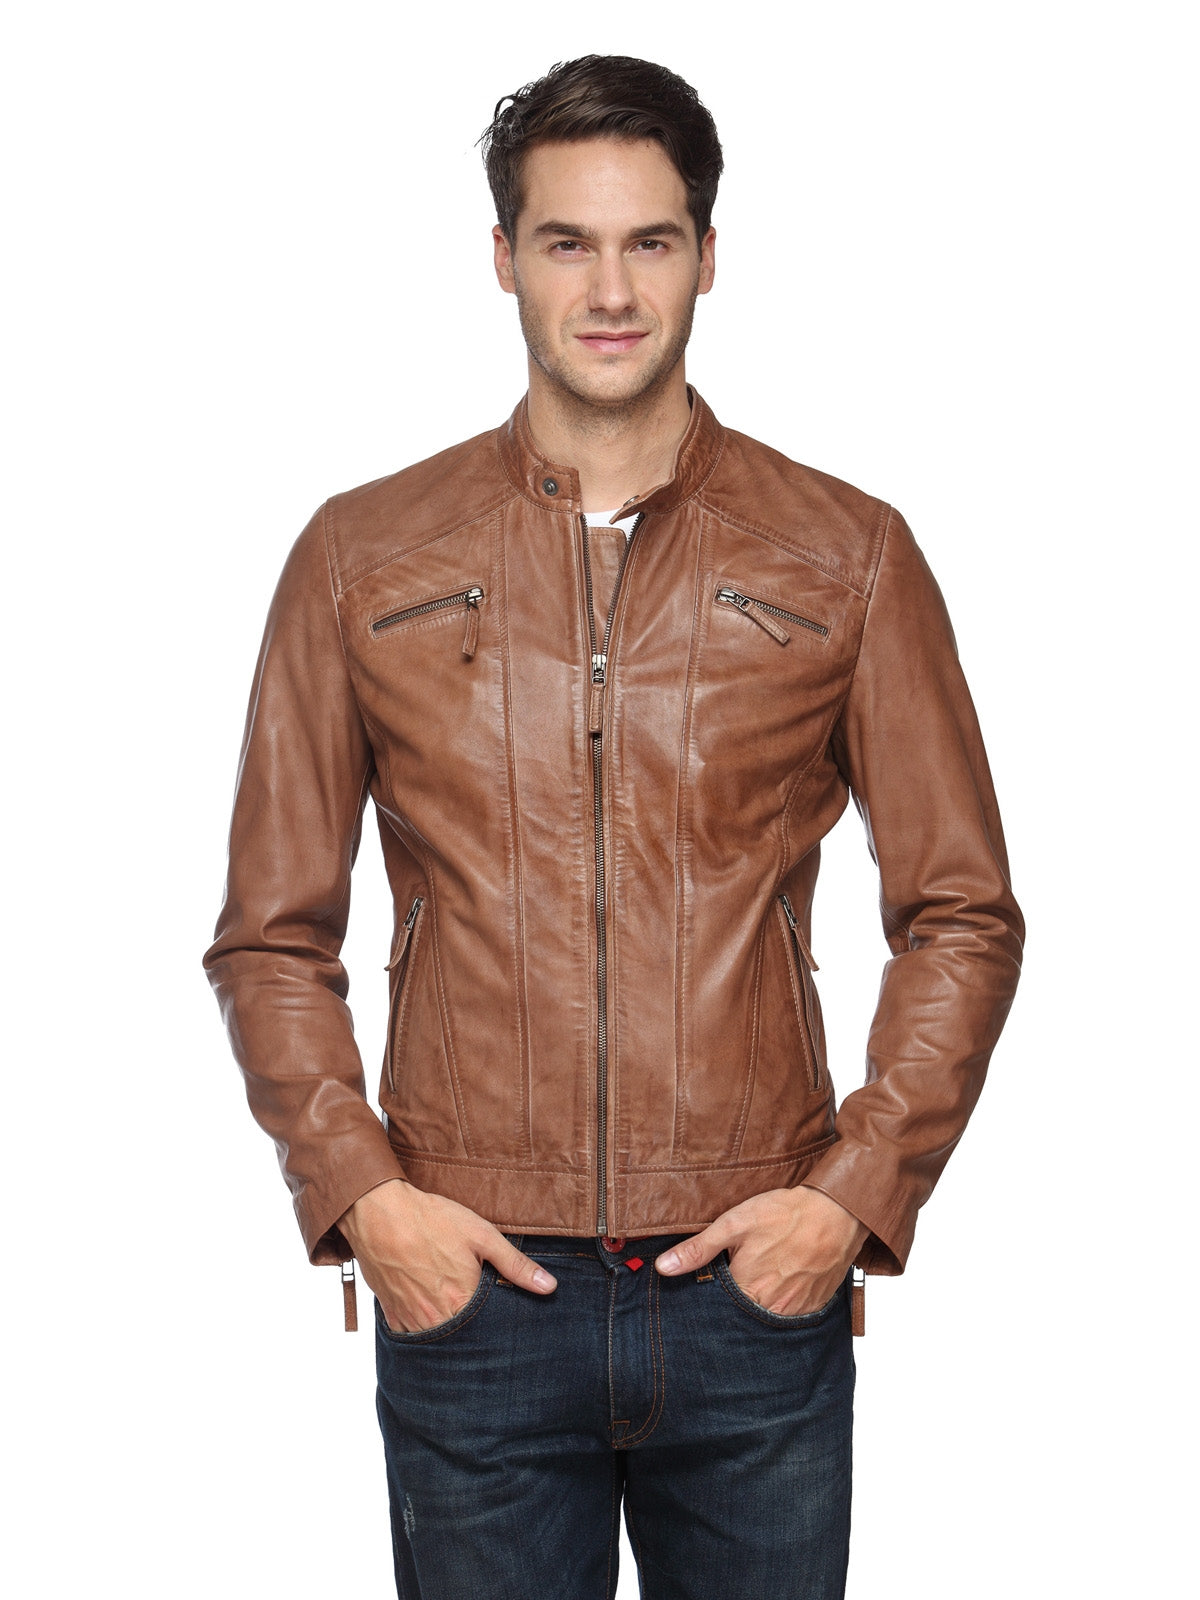 Leather Blazer for Men - Lambskin Leather Blazer - Mens Leather Sport Coats  and Blazers (Tan Brown, X-Large) at Amazon Men's Clothing store